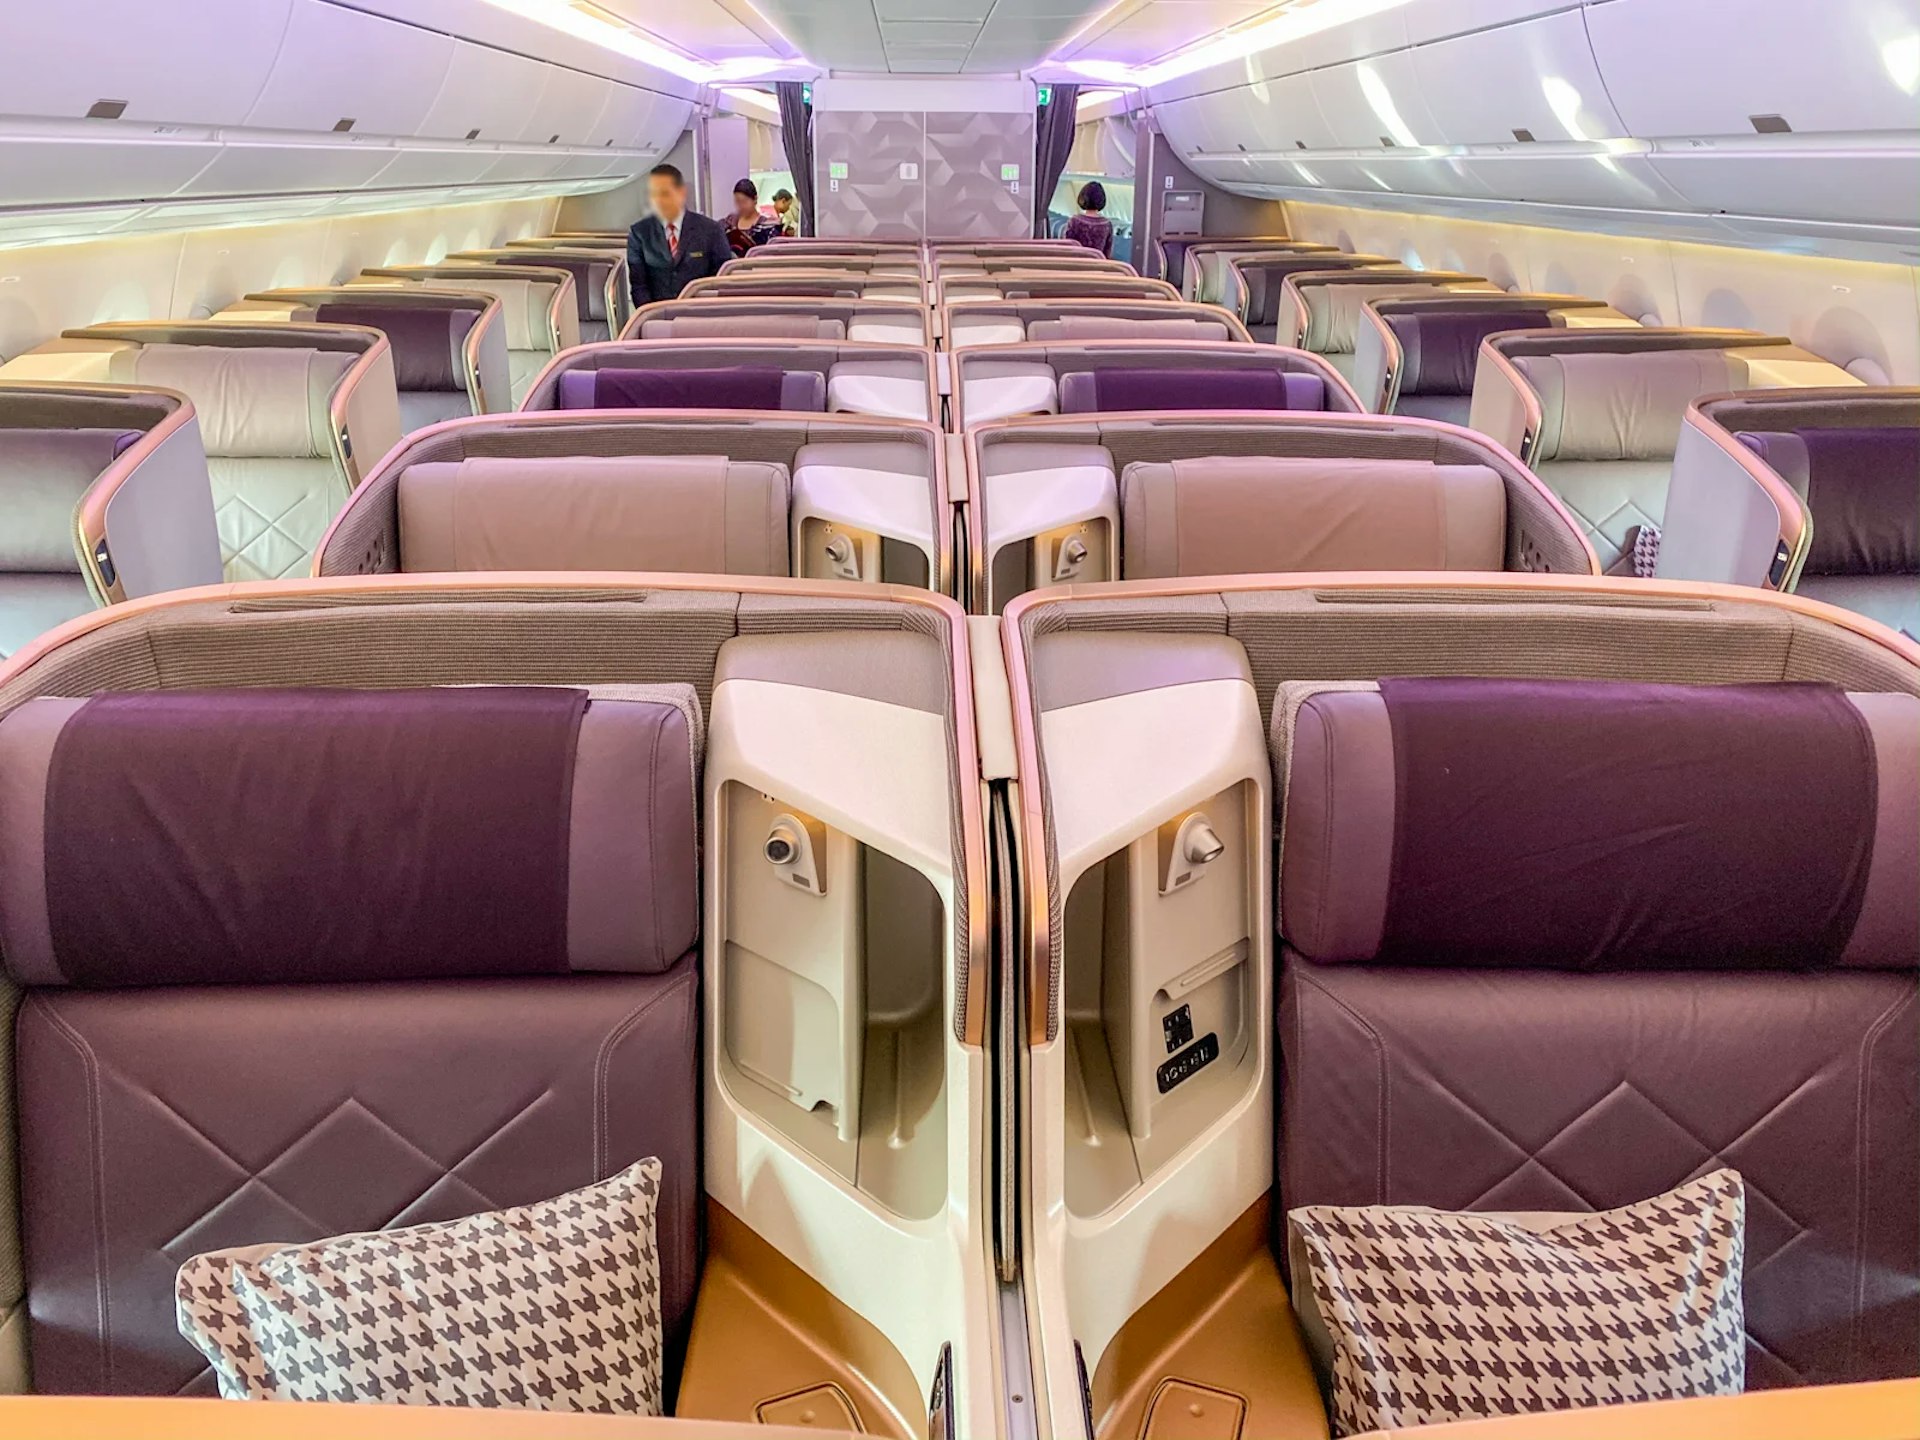 The Singapore Airlines business class on the Airbus A350 